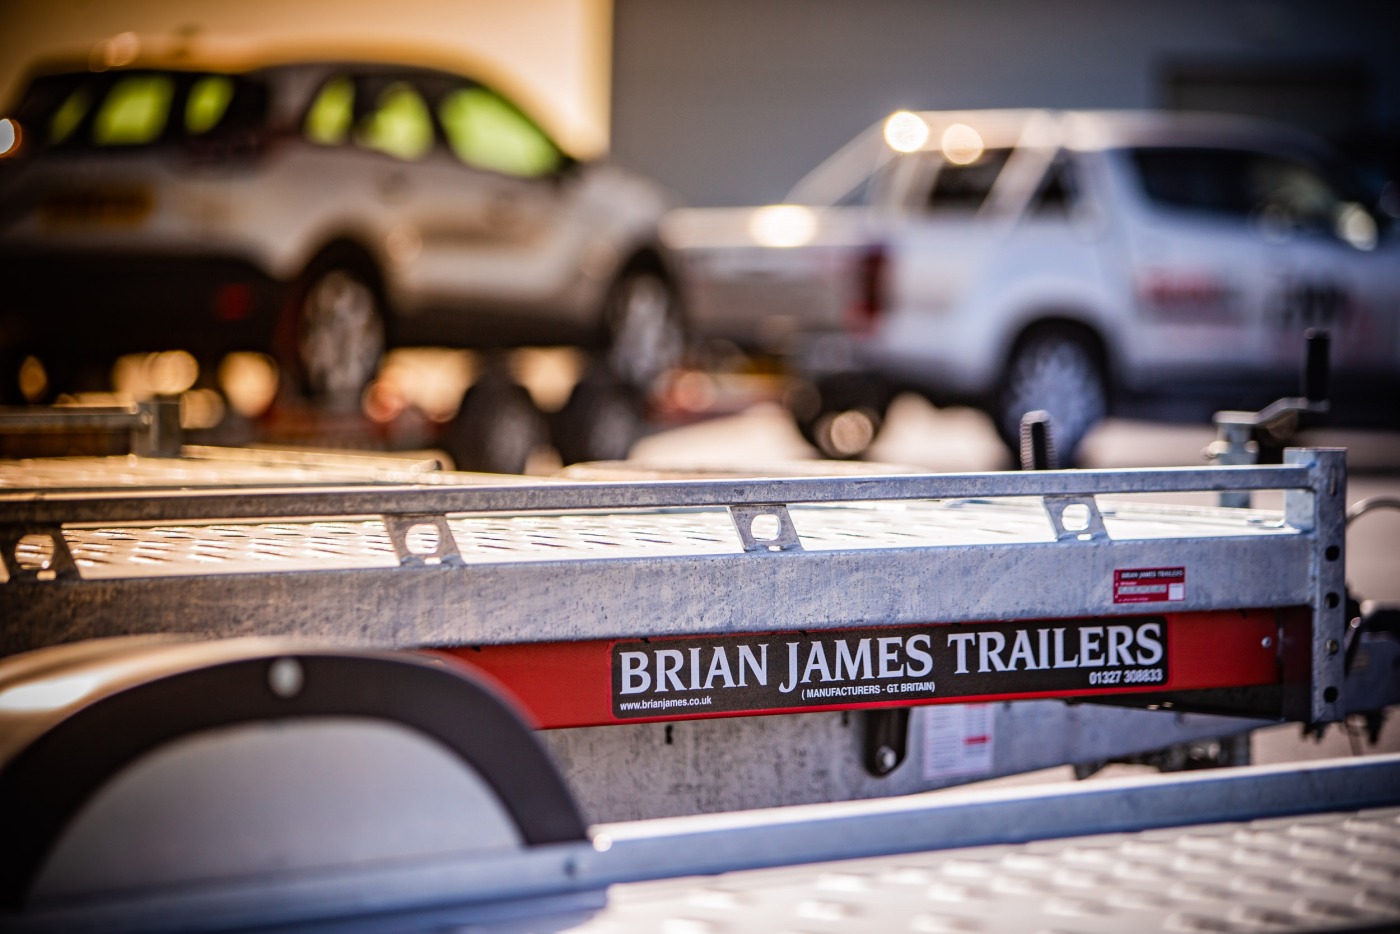 Brian James Trailer - About Us